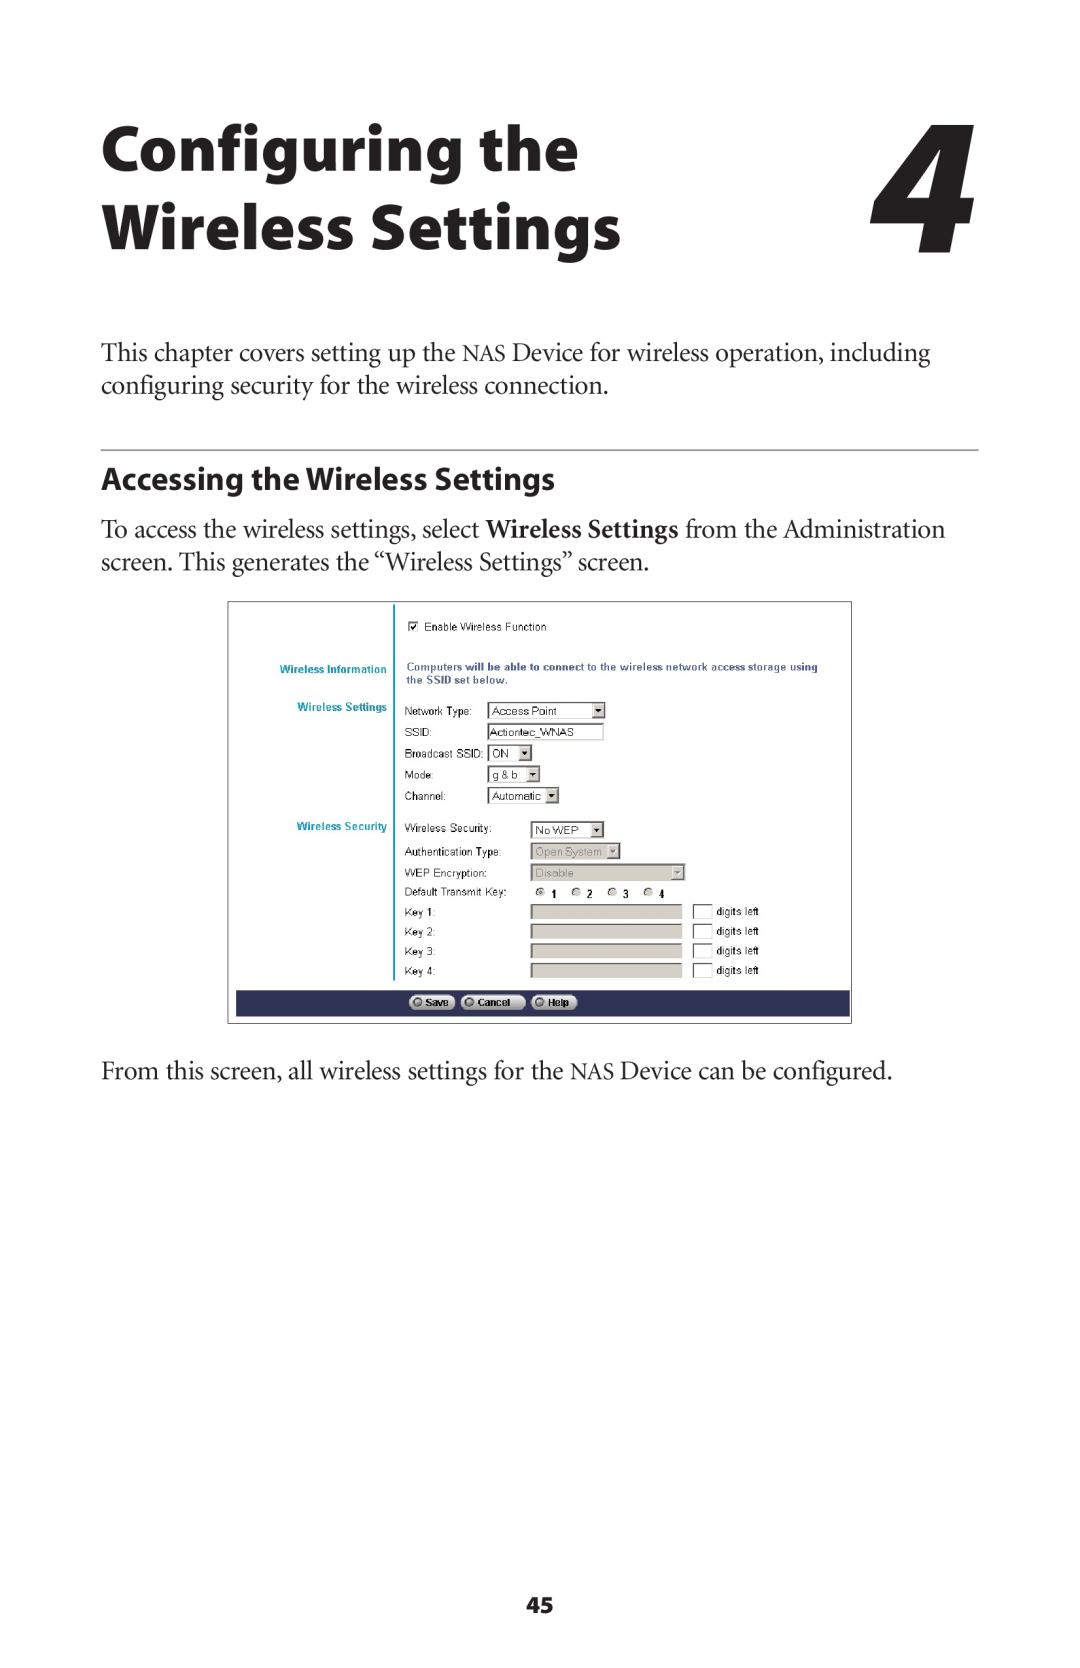 Actiontec electronic WNS100-250, WNS100-200, WNS100-160, WNS100-400 Accessing the Wireless Settings, Configuring the 